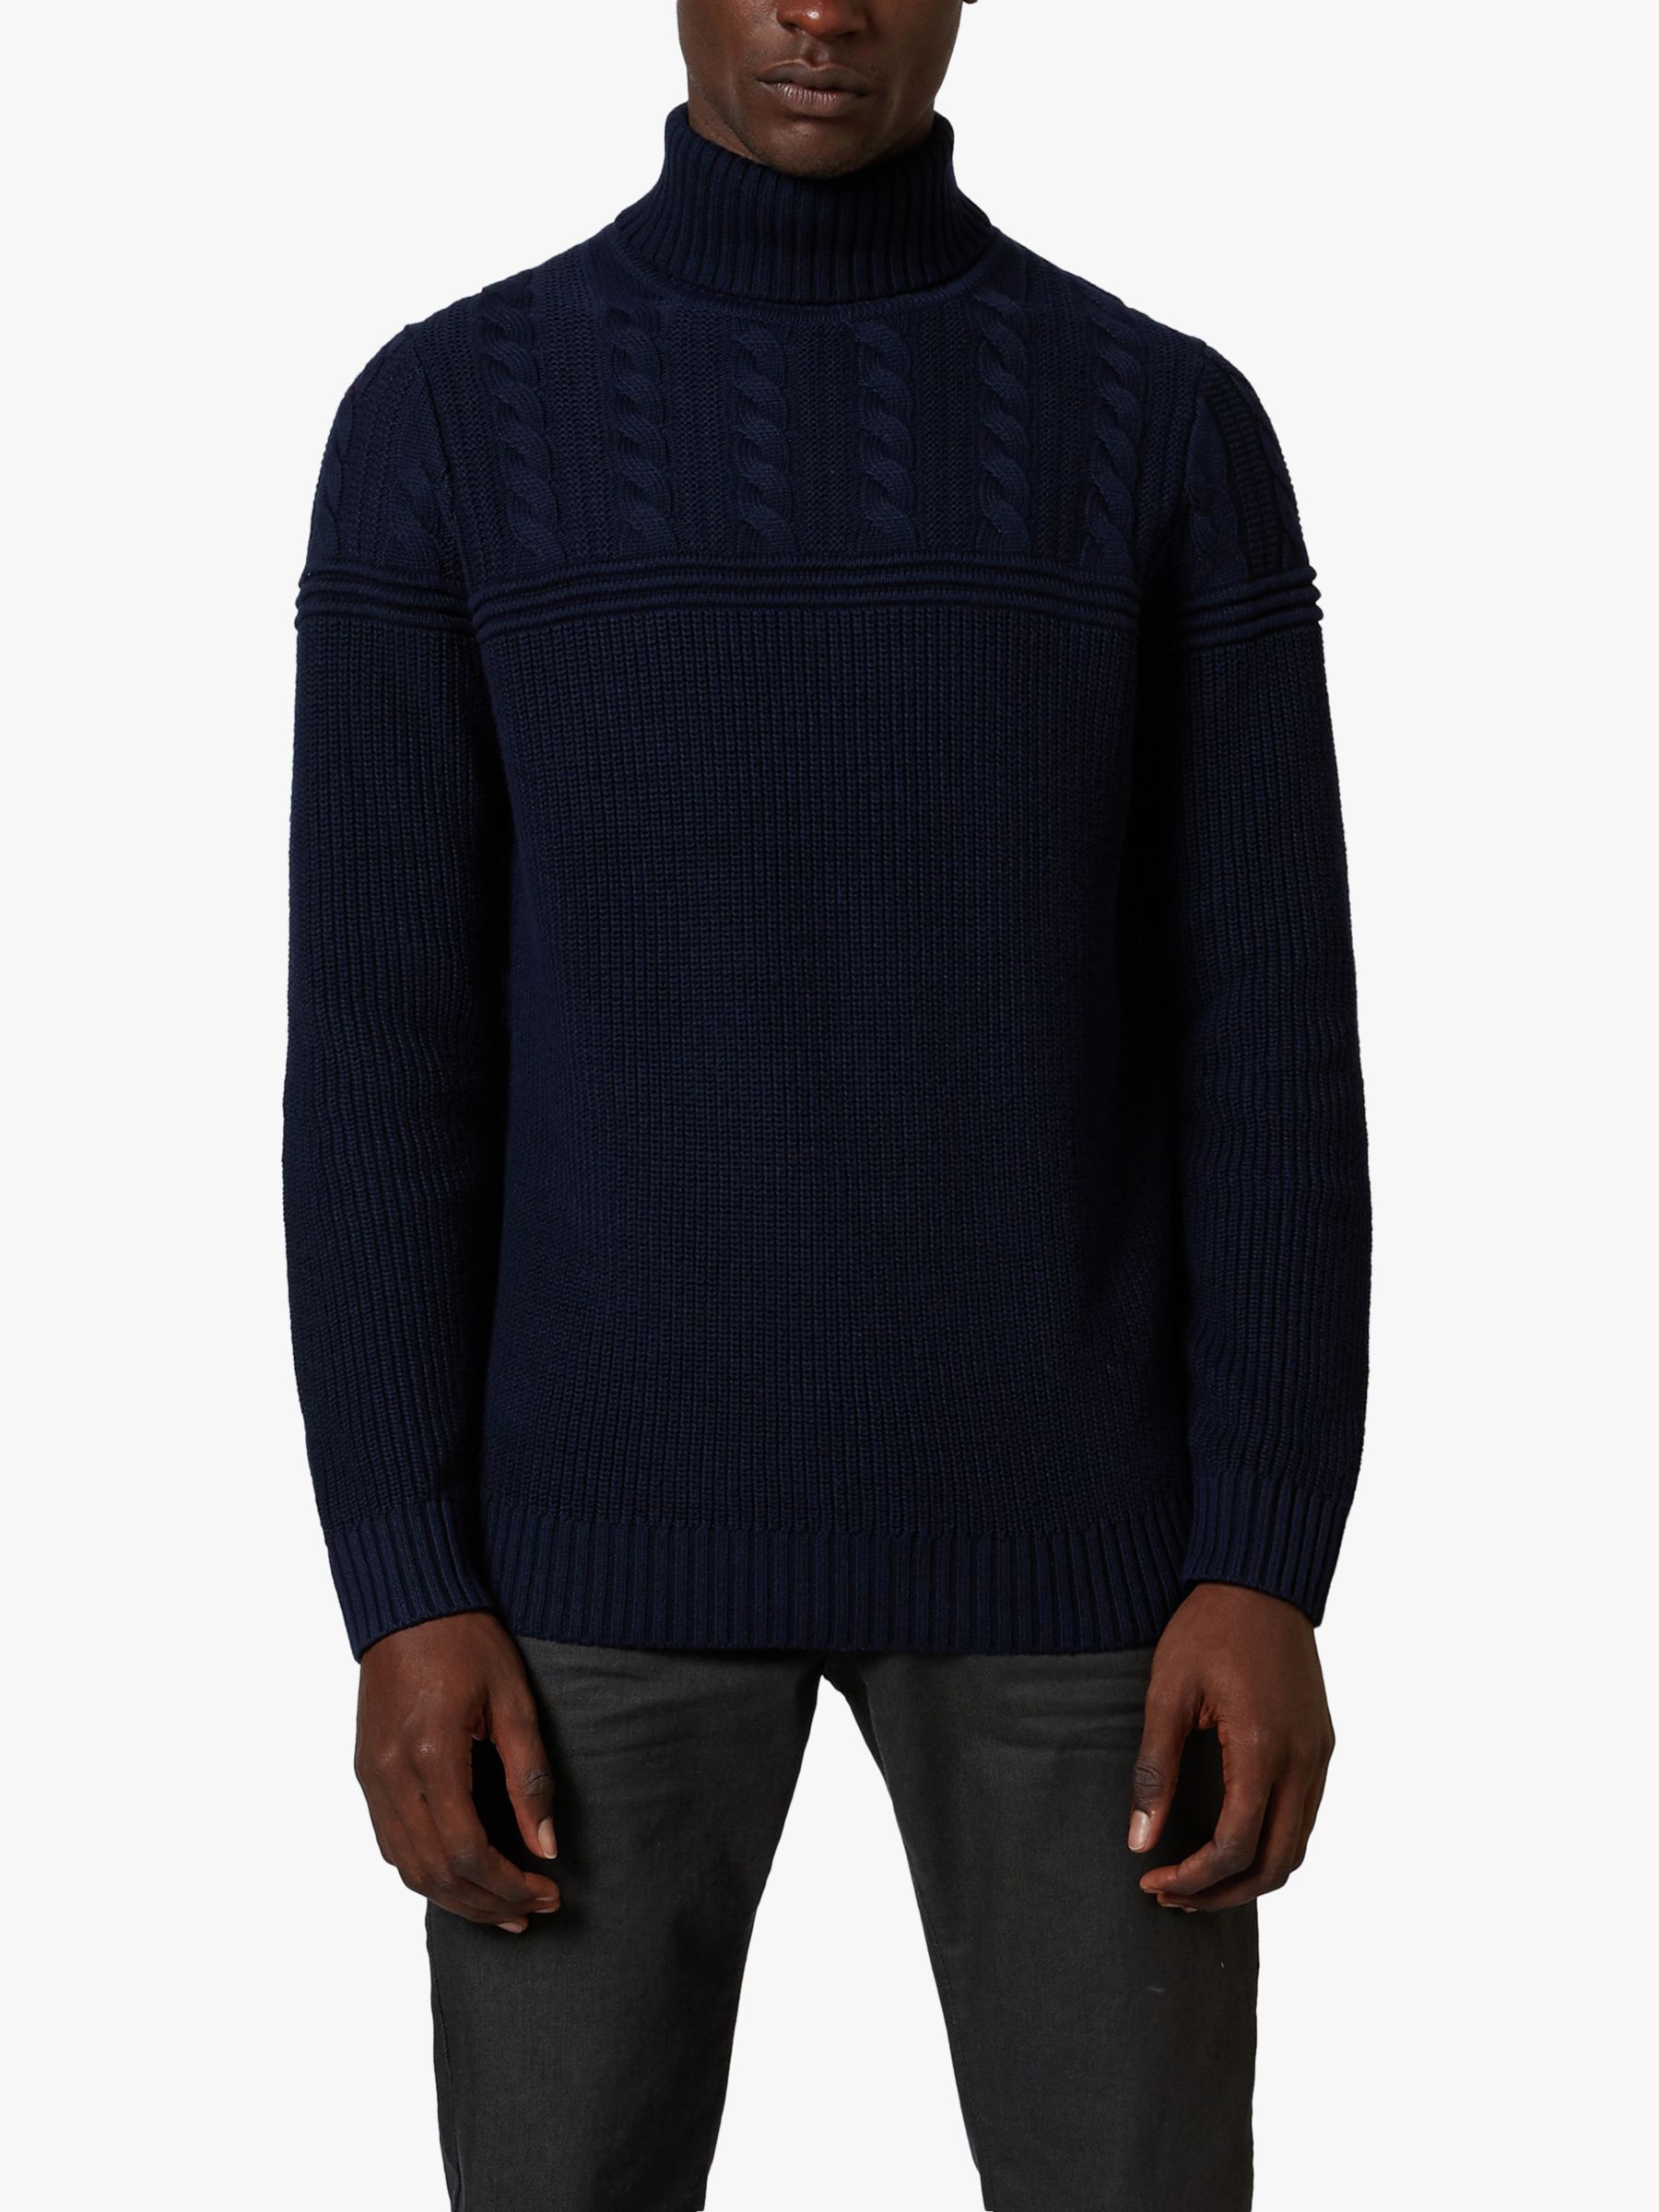 Ted Baker Rolly Chunky Cable Knit Roll Neck Jumper at John Lewis & Partners